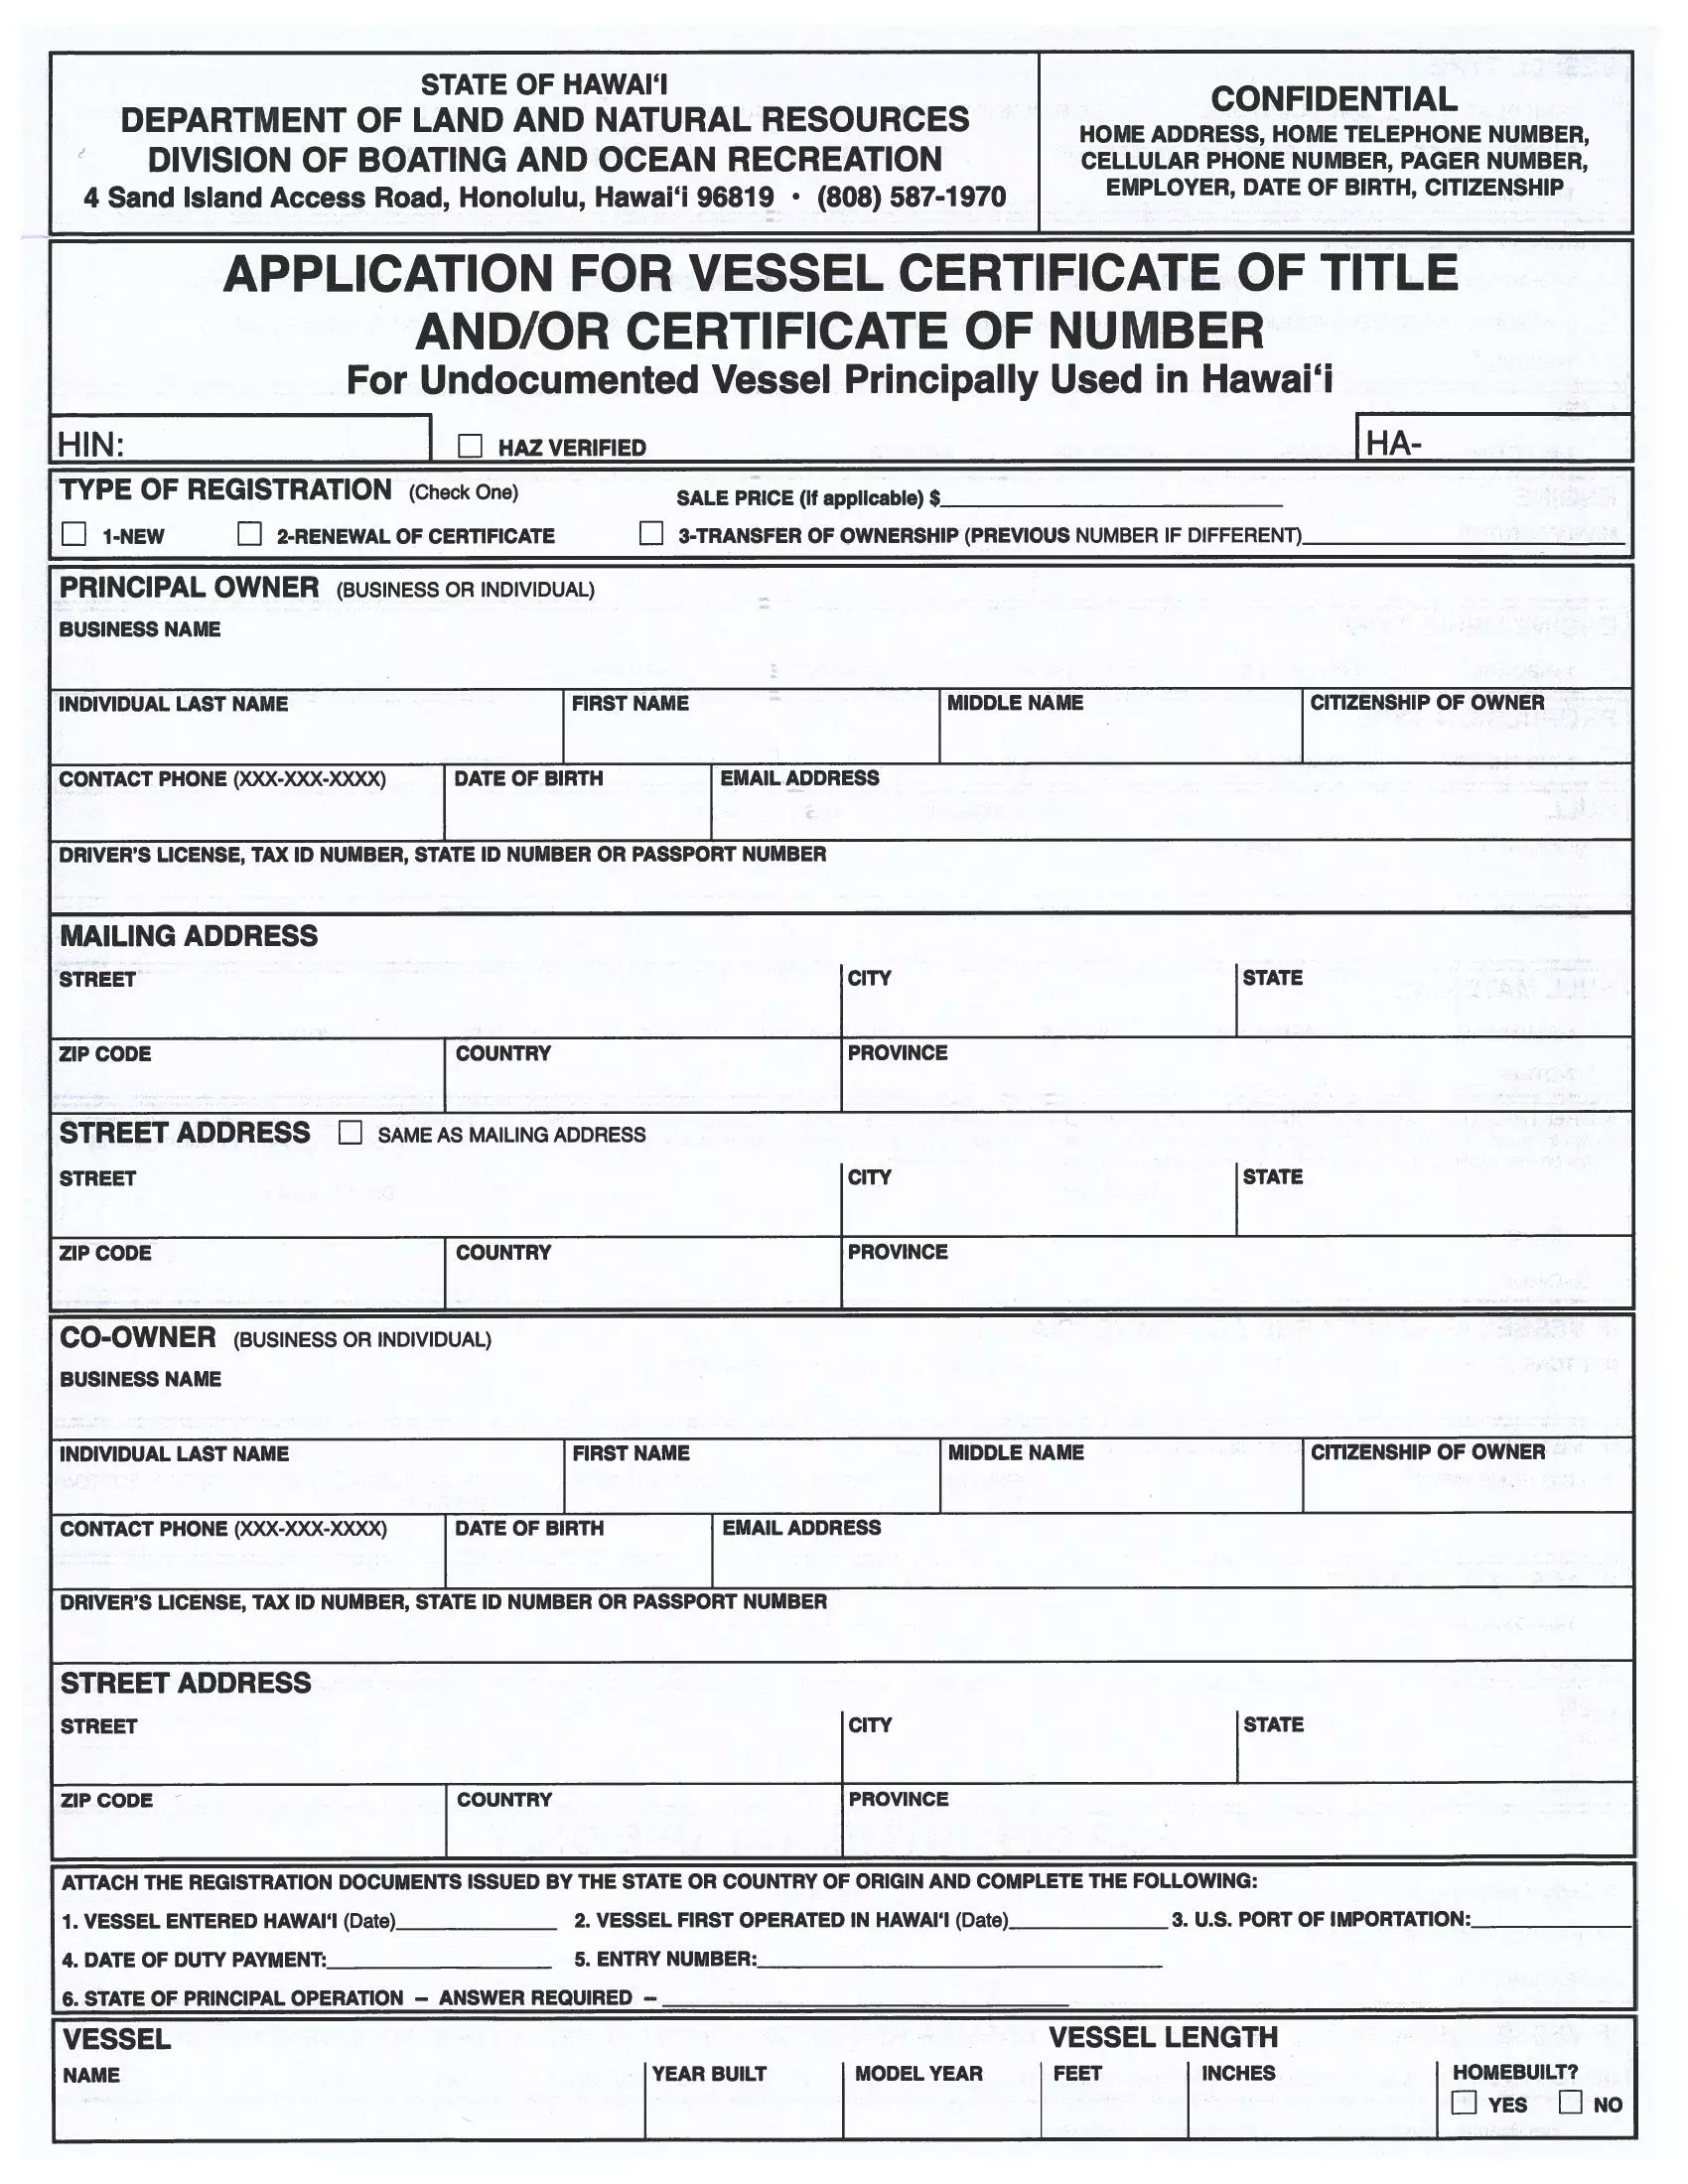 (Boat) Application for Vessel Certificate of Title